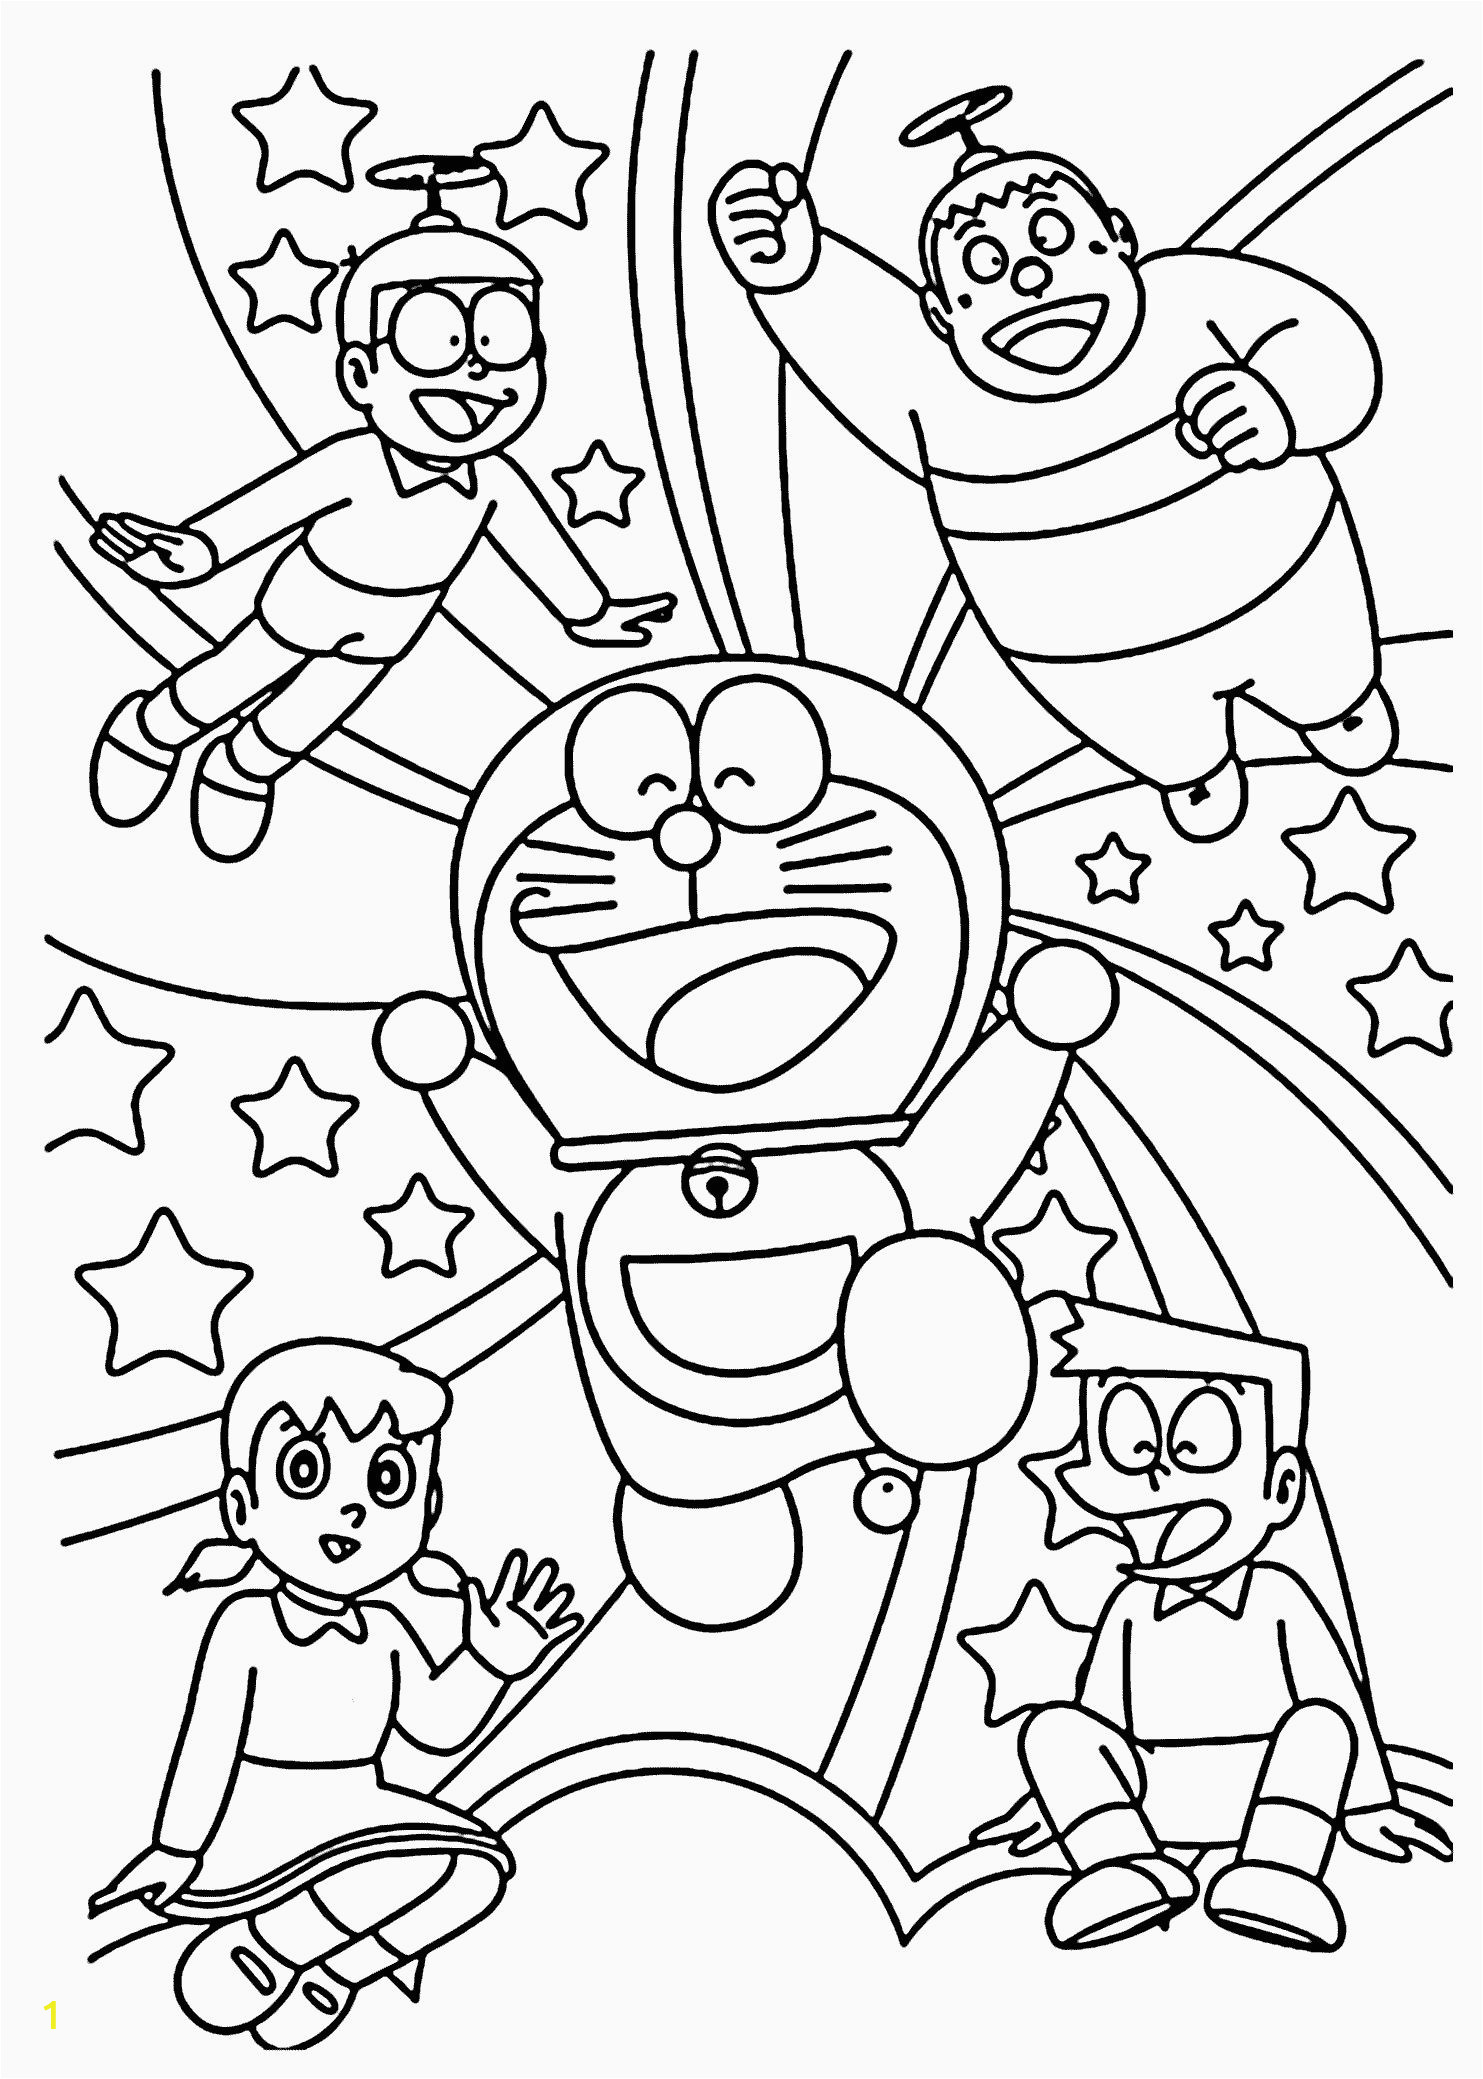 Nobita Coloring Pages to Print Cartoon Coloring Book Pdf In 2020